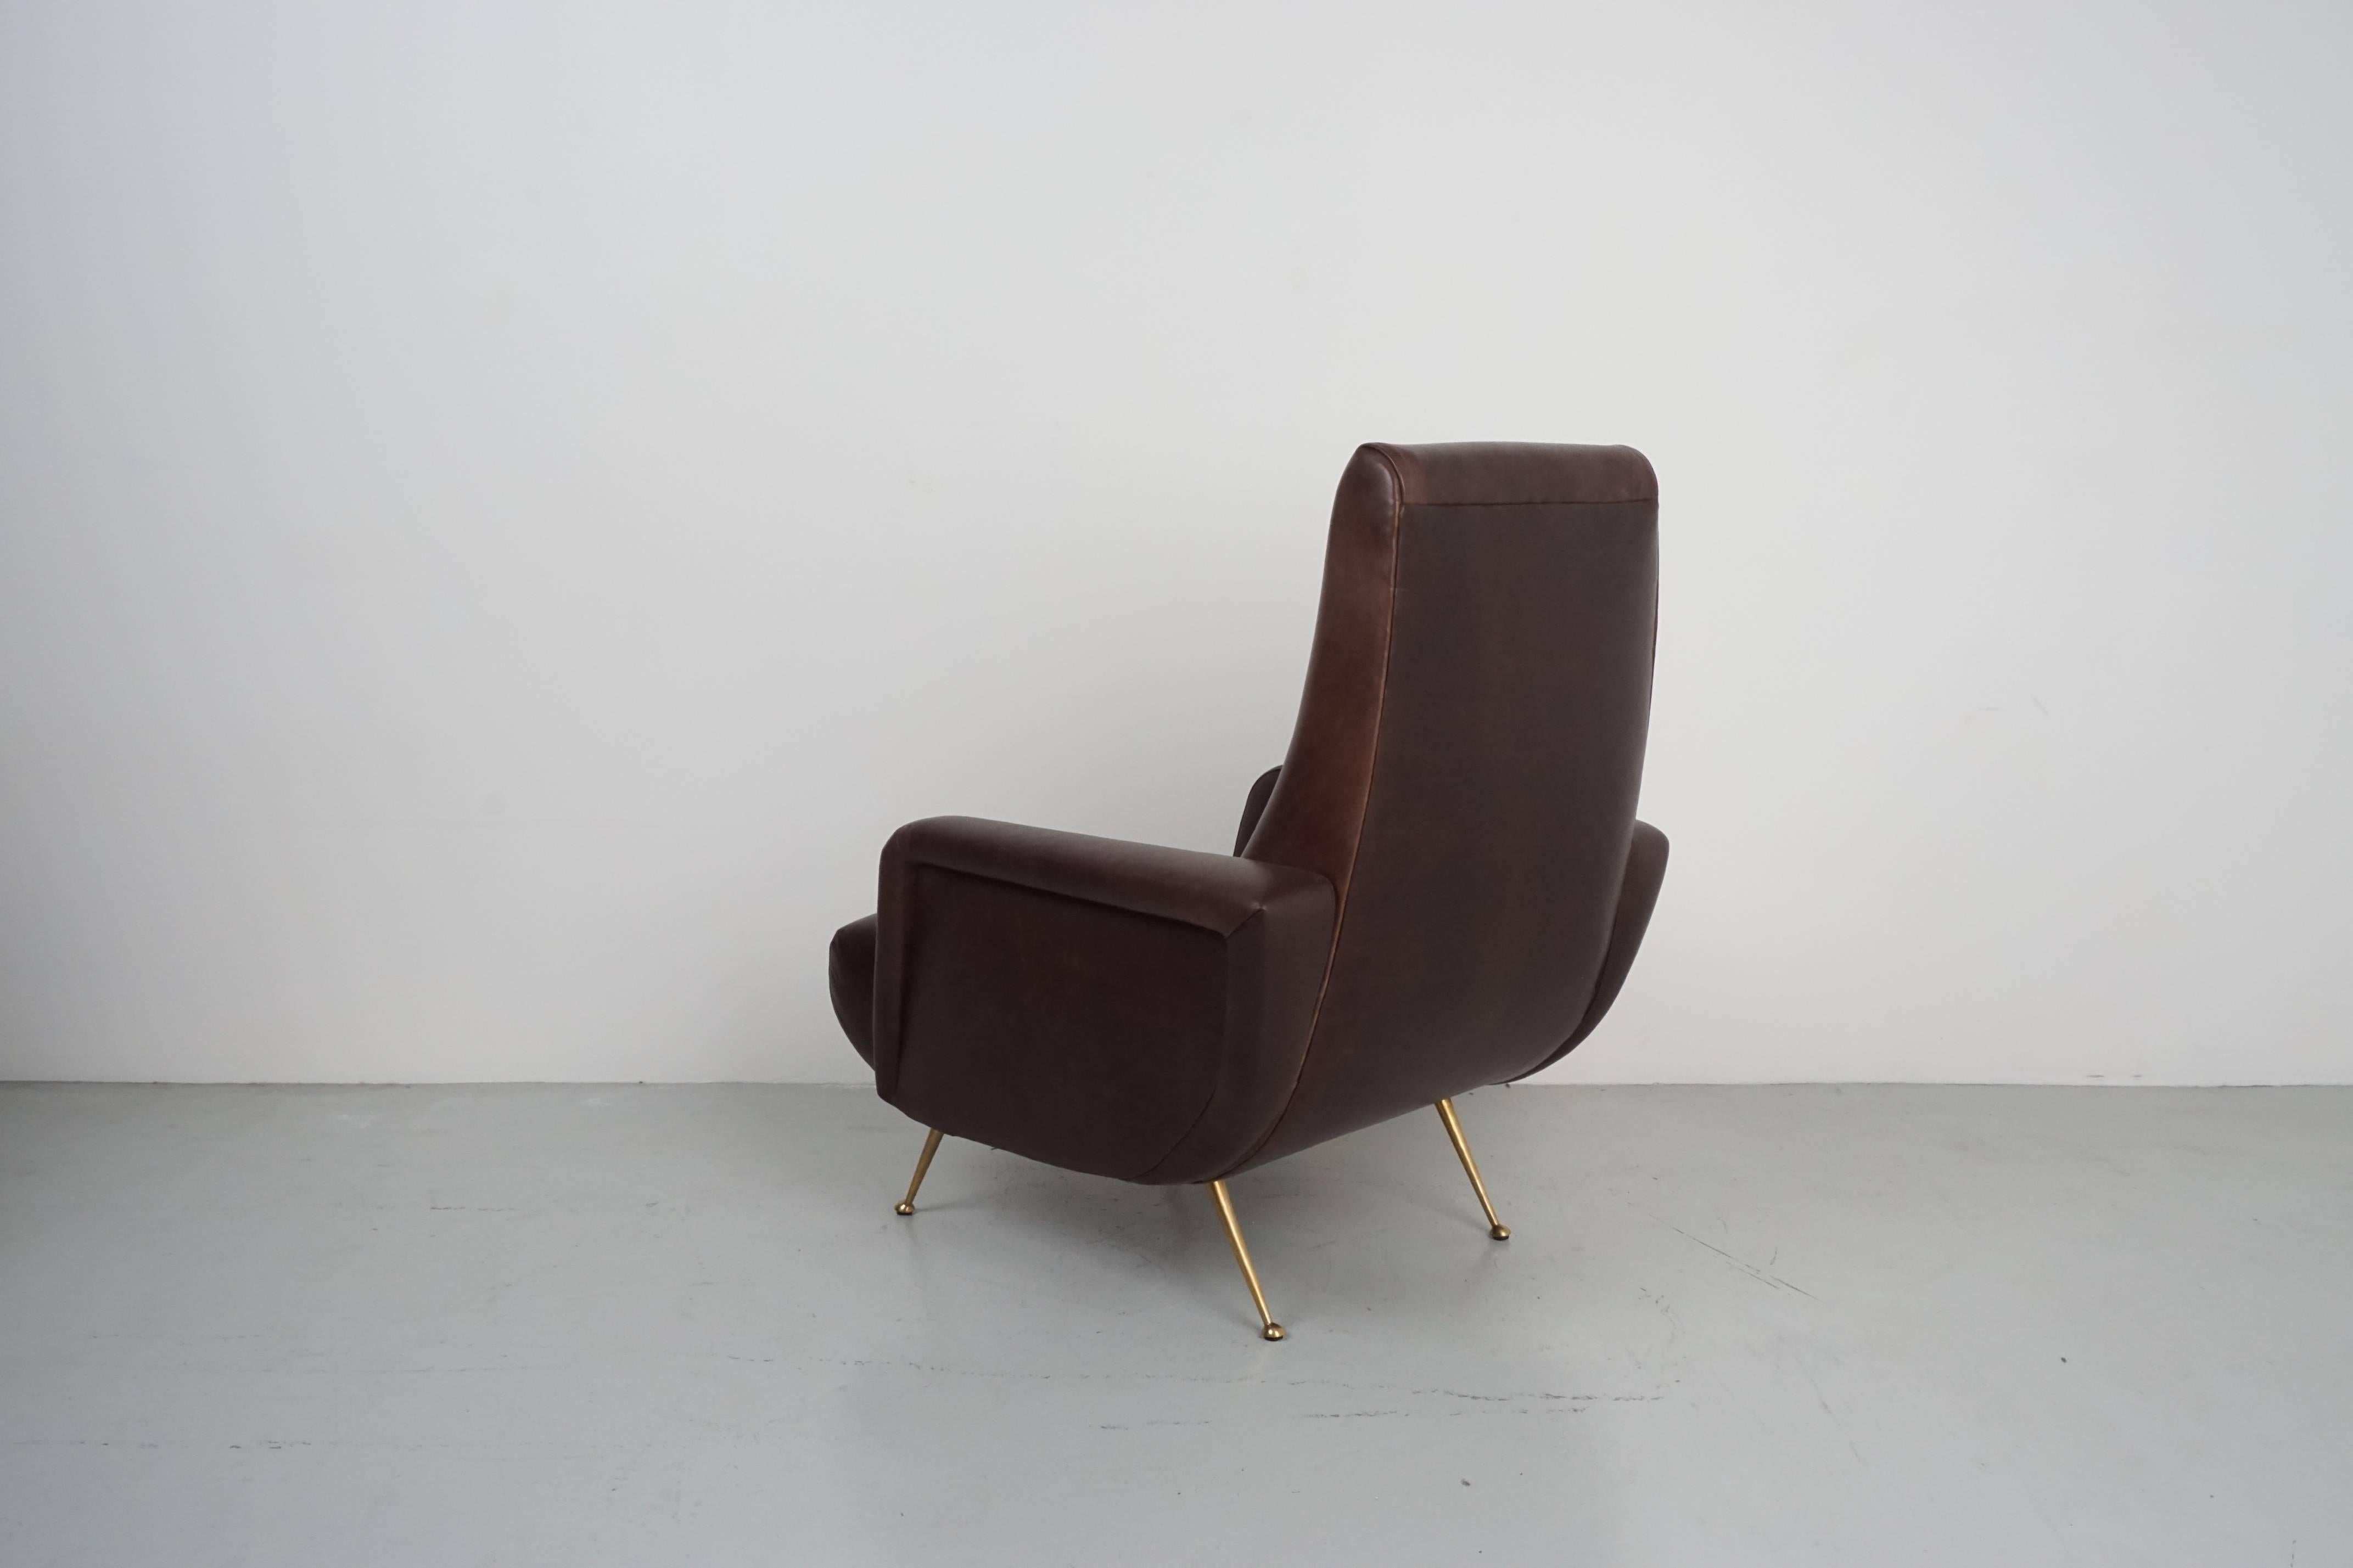 Italian Sculptural Leather Chairs 2